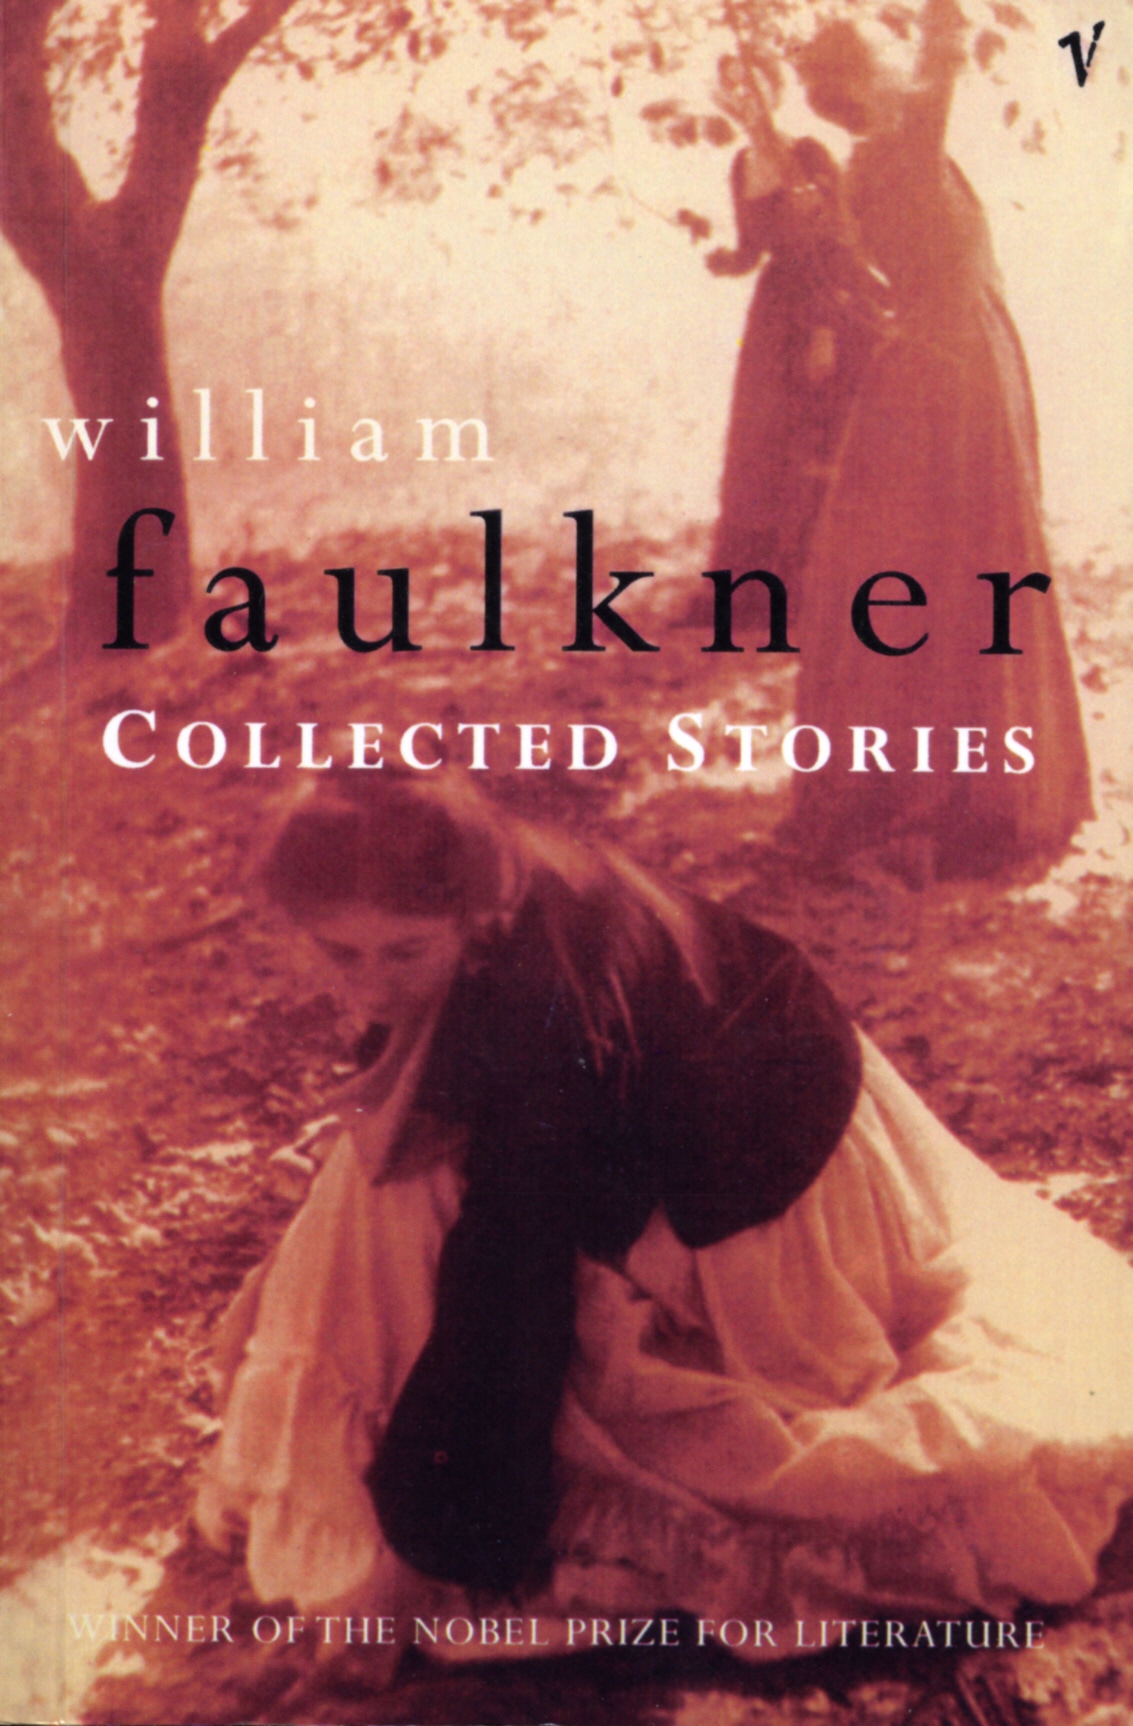 Book “Collected Stories” by William Faulkner